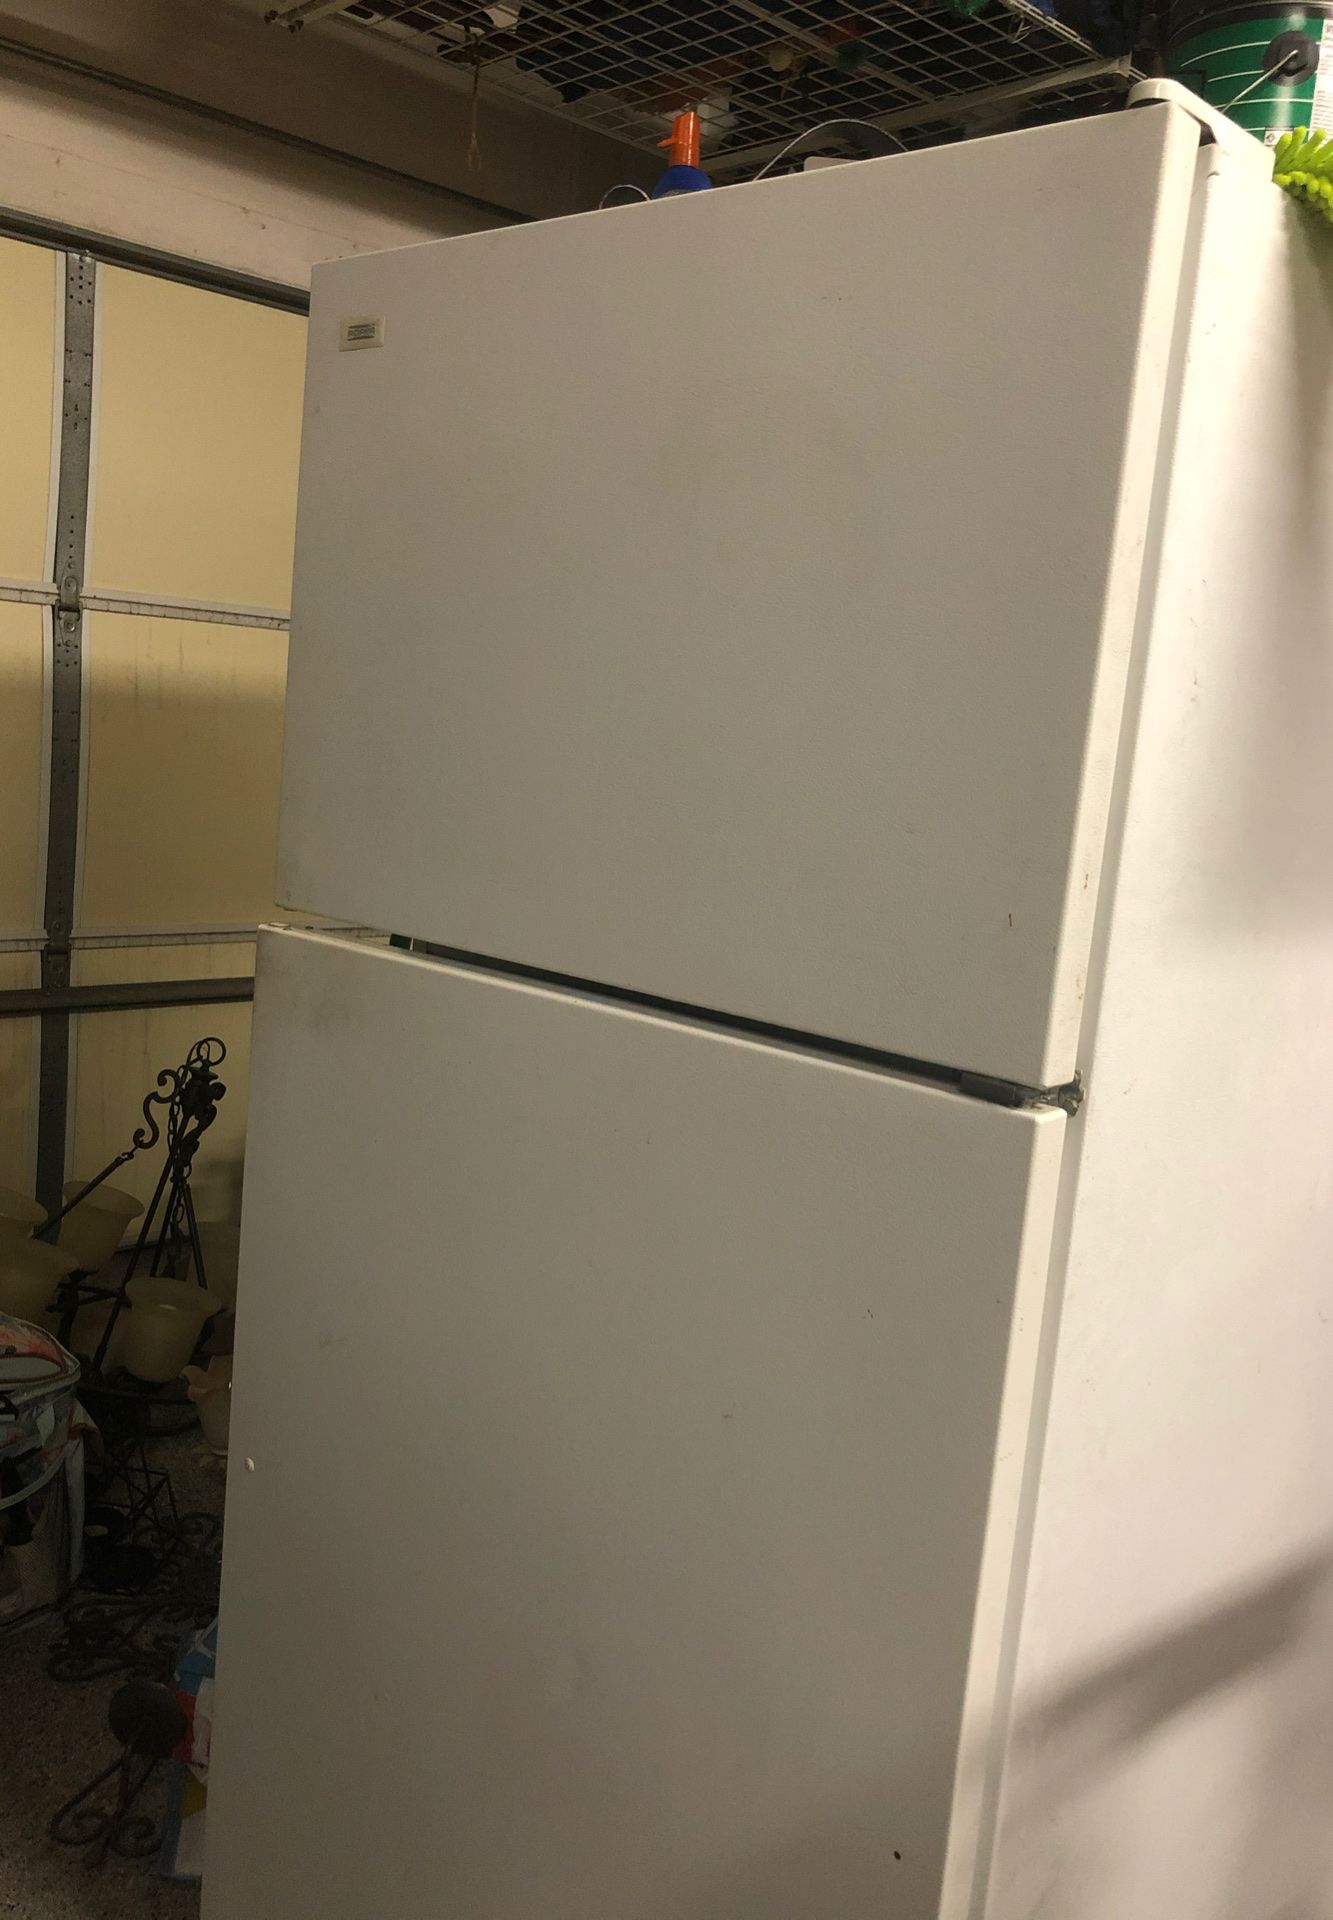 FREE white refrigerator You pick up only!